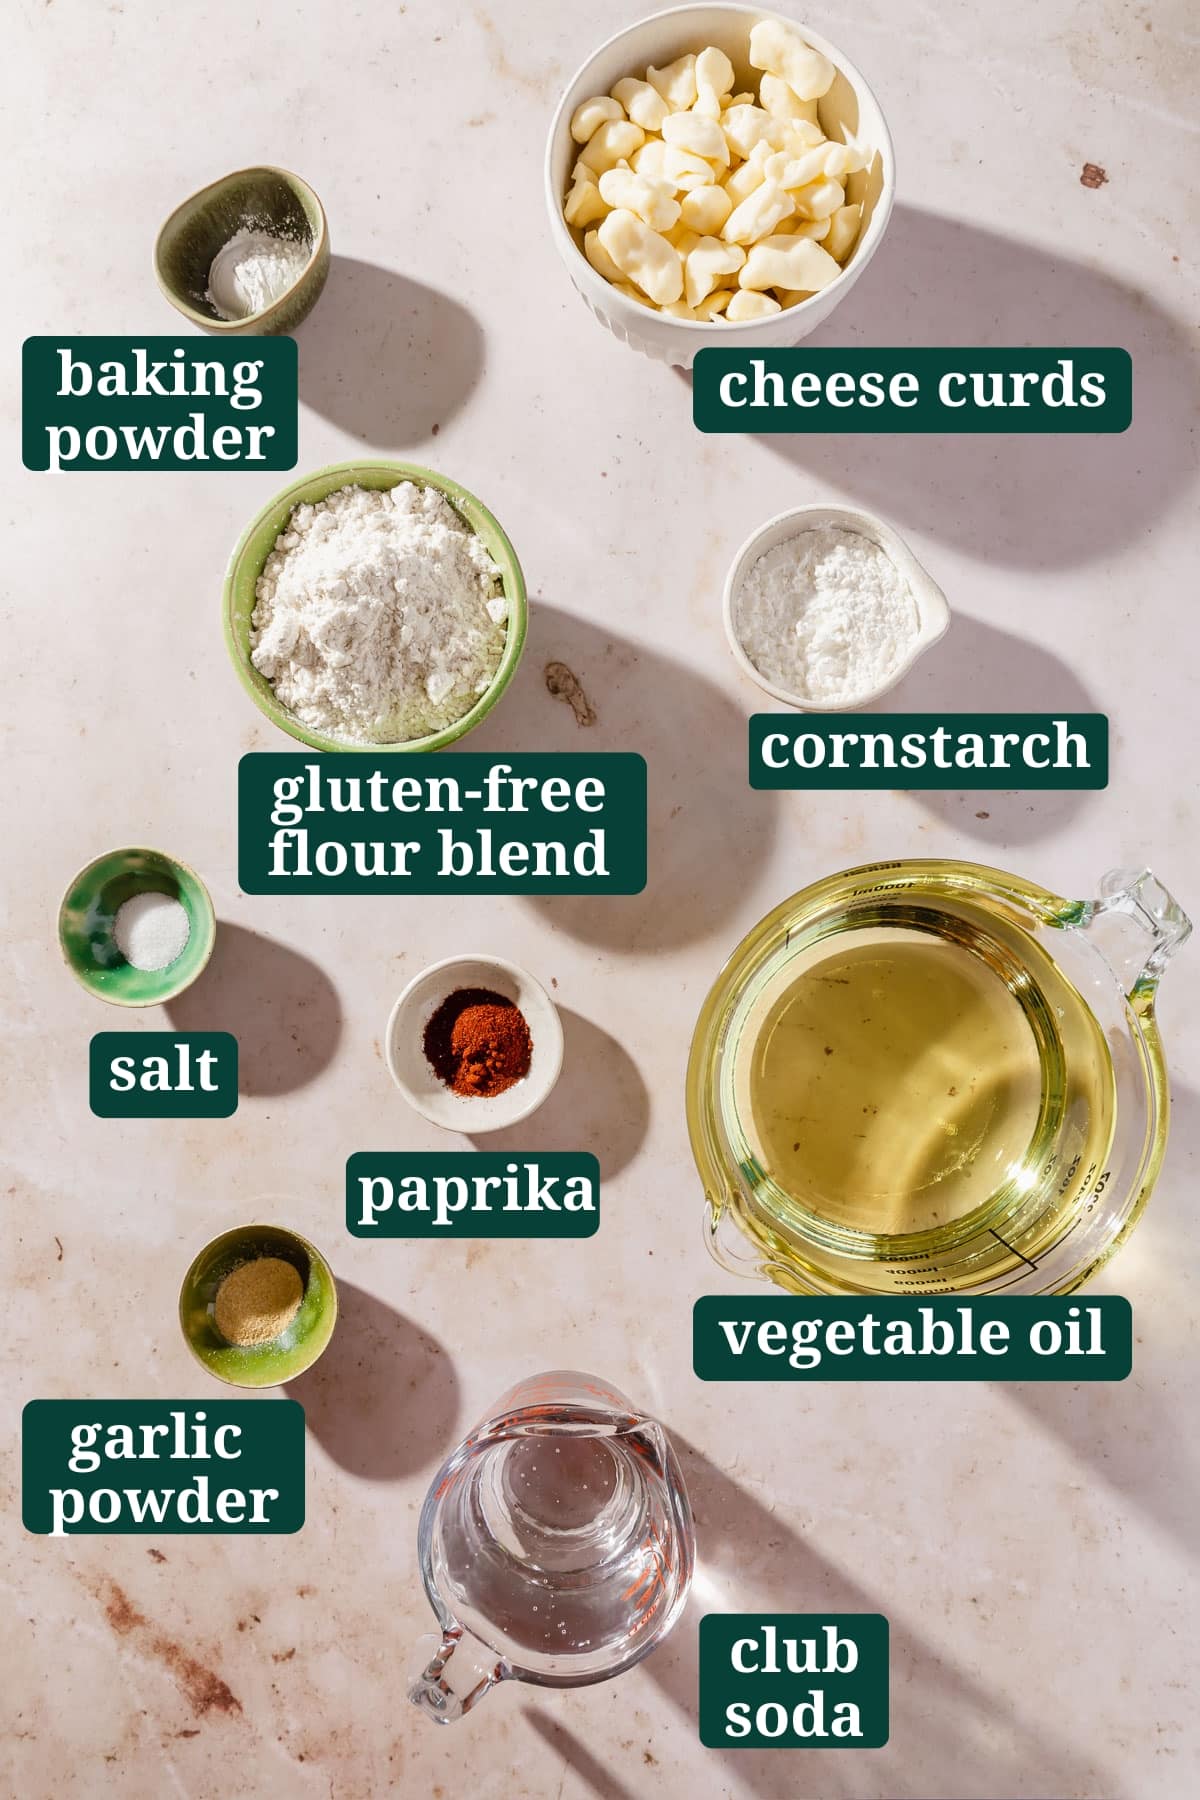 Ingredients in small bowls on a table to make gluten-free cheese curds, including white cheddar cheese curds, baking powder, gluten-free flour, cornstarch, salt, paprika, vegetable oil, garlic powder, and club soda, with text overlays over each ingredient.